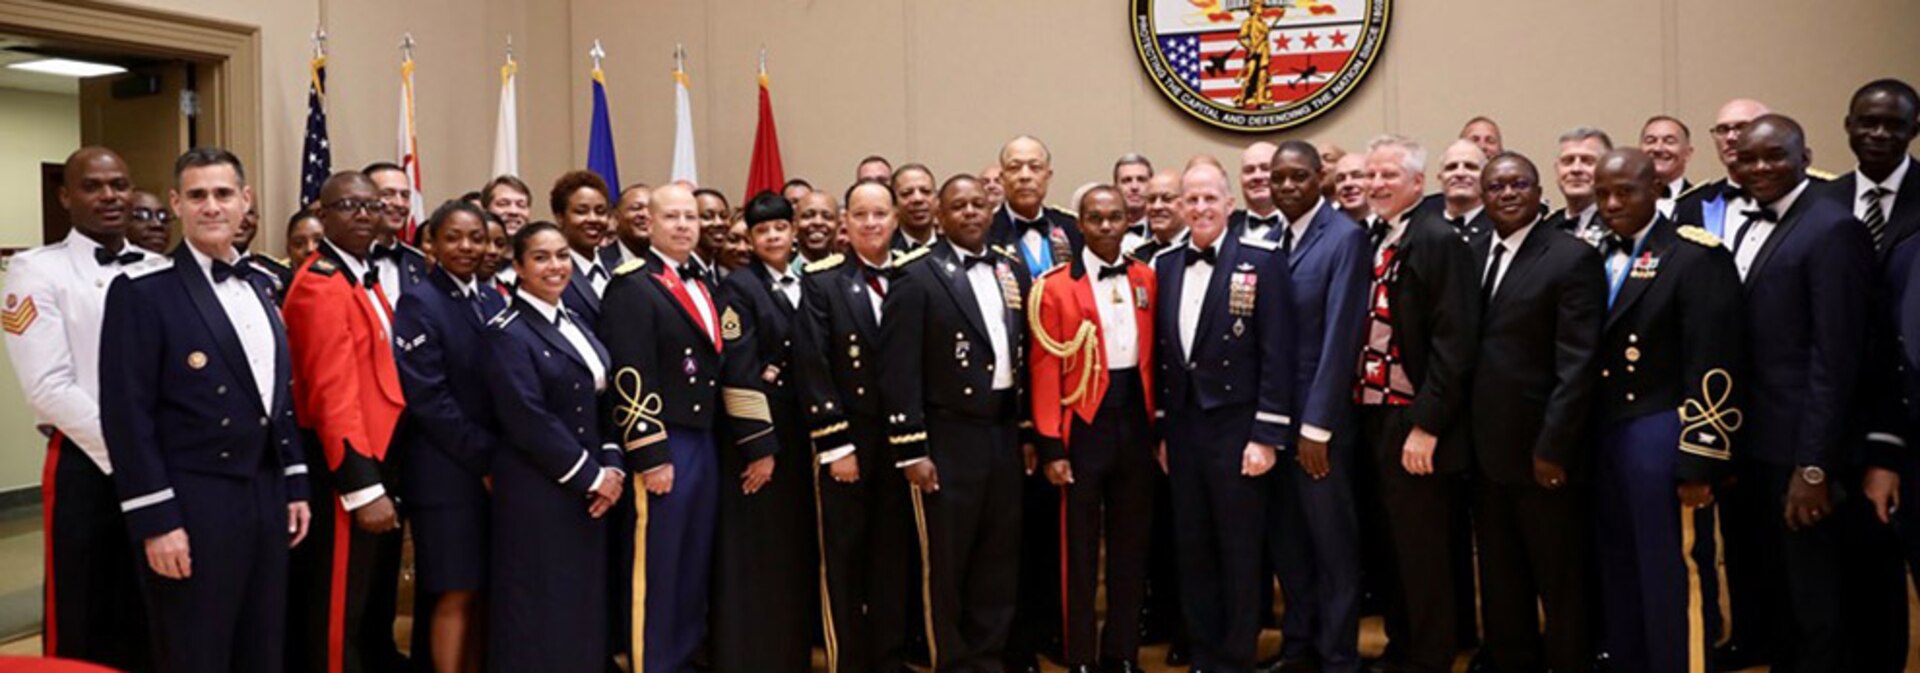 Celebrating 217 years of service as "Capitol Guardians," as well as strong partnerships with the Jamaican Defense Force and Burkina Faso Armed Forces.